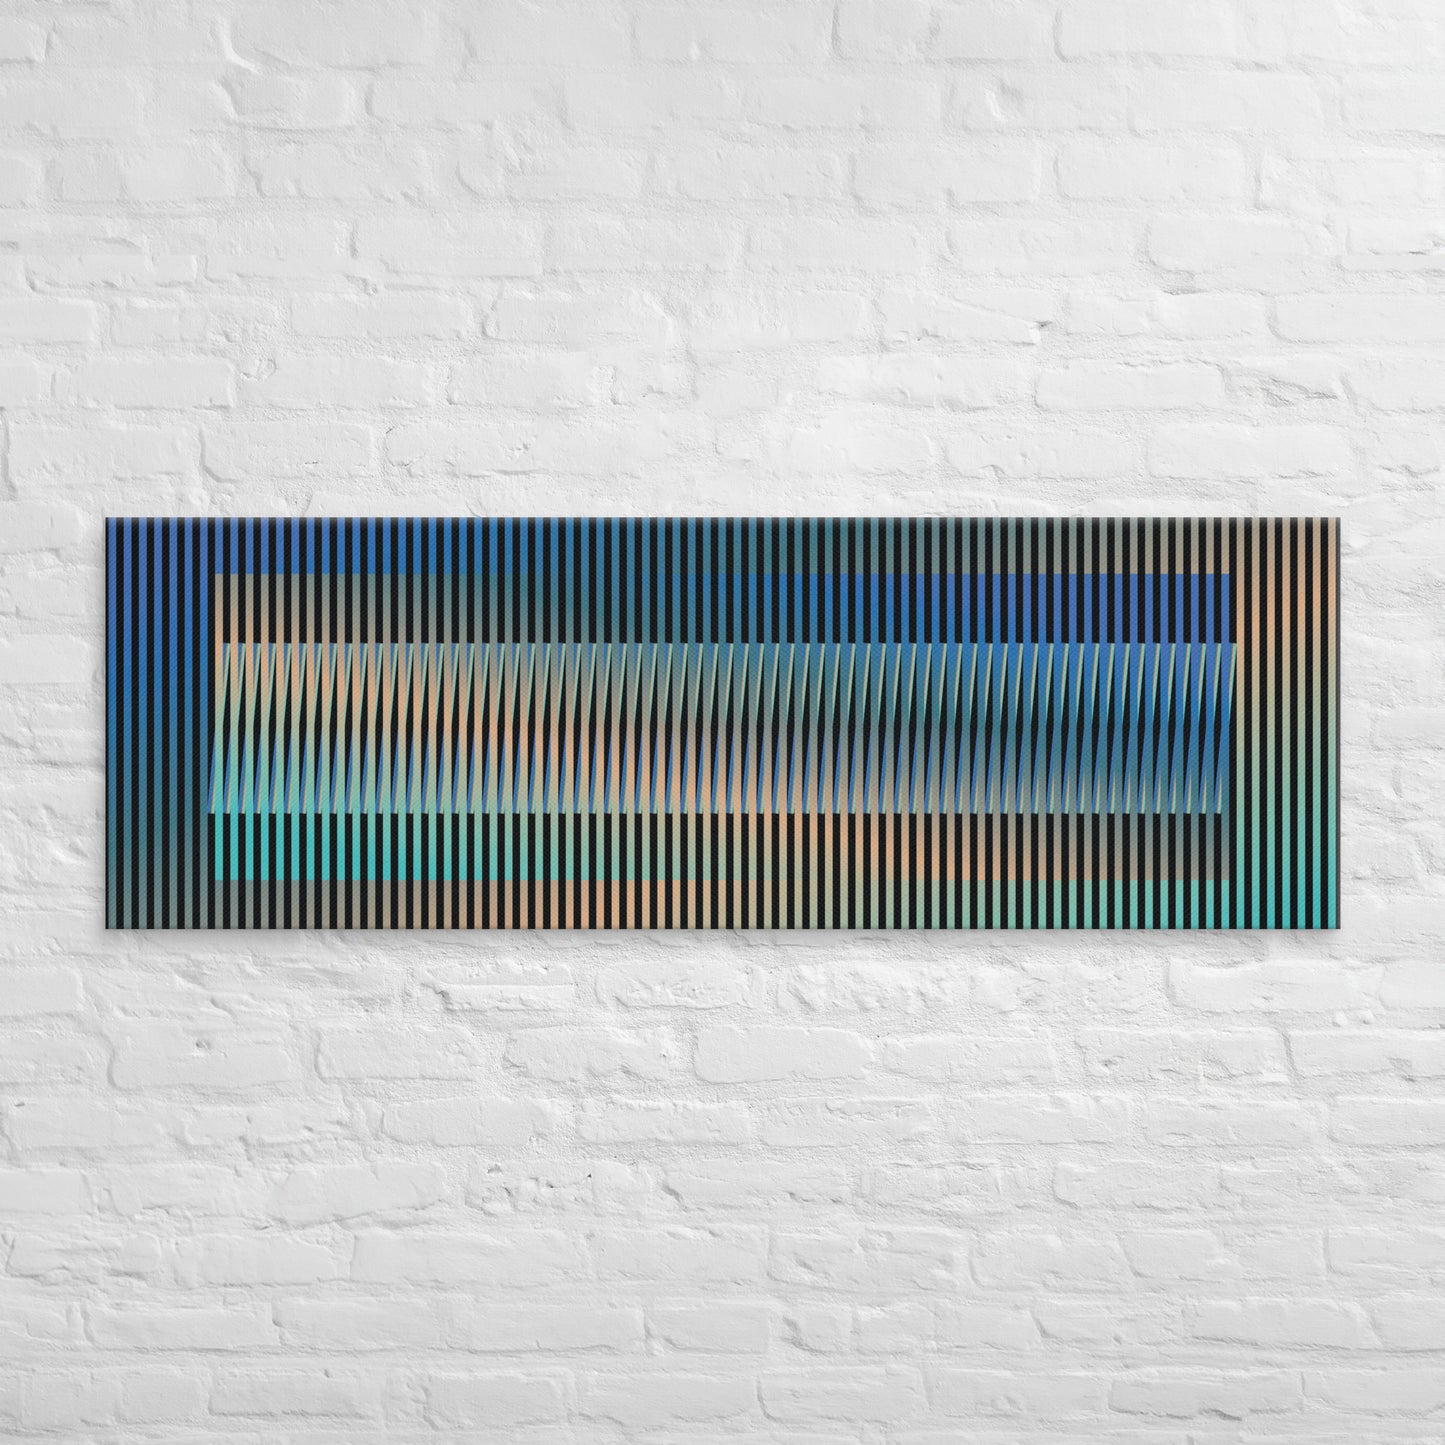 Canvas Painting, Abstract Art Chromatic Symphony by César Otero, Contemporary Art for Interior Decoration, Living Rooms, Bedrooms, Dining Rooms, Entryways and Offices